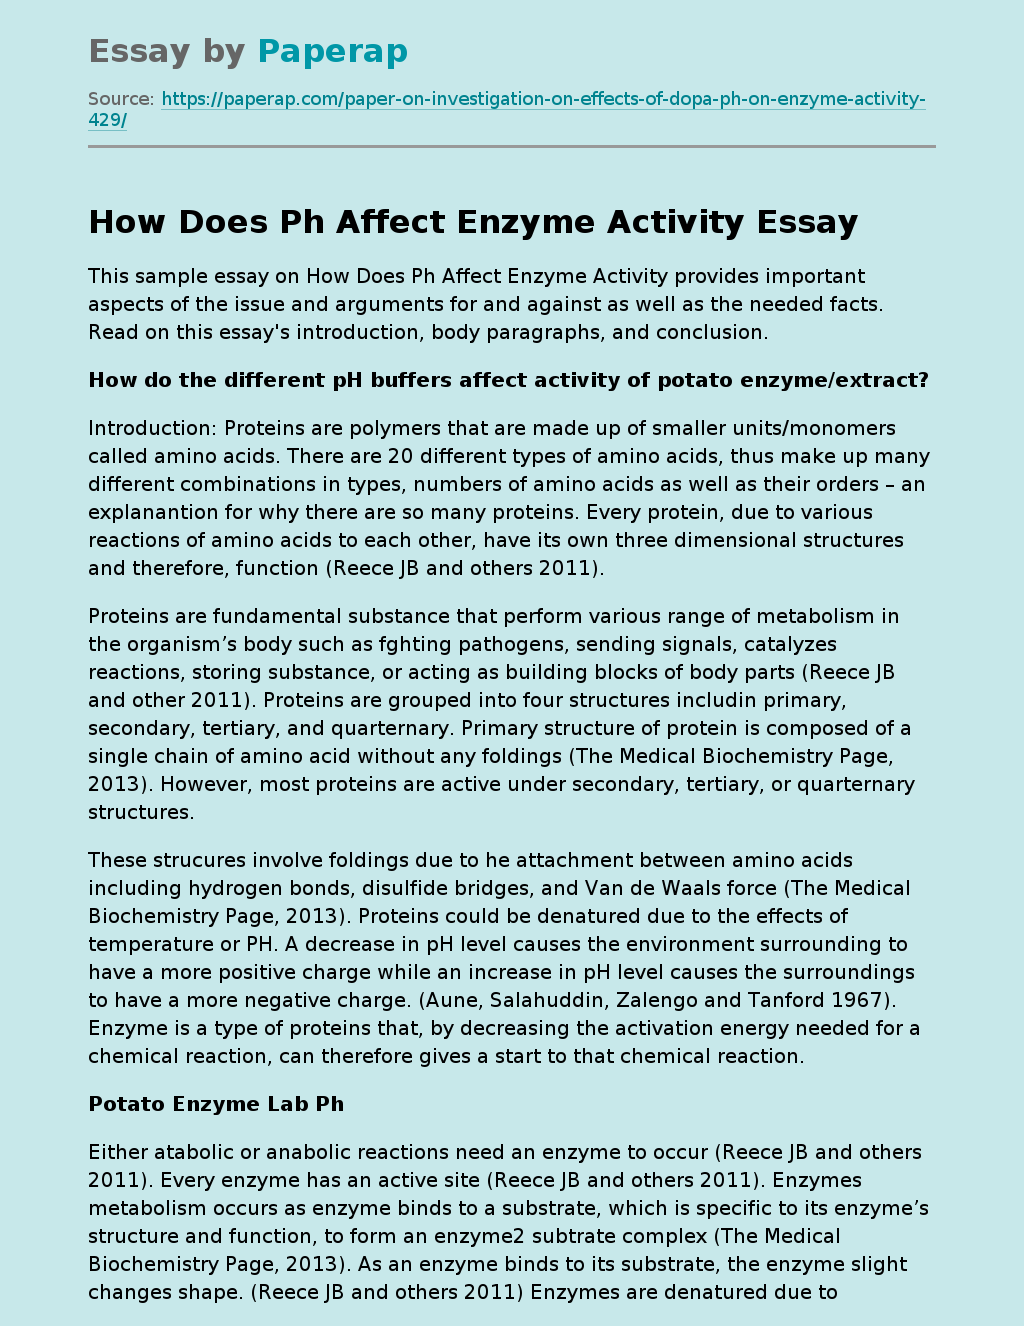 How Does Ph Affect Enzyme Activity